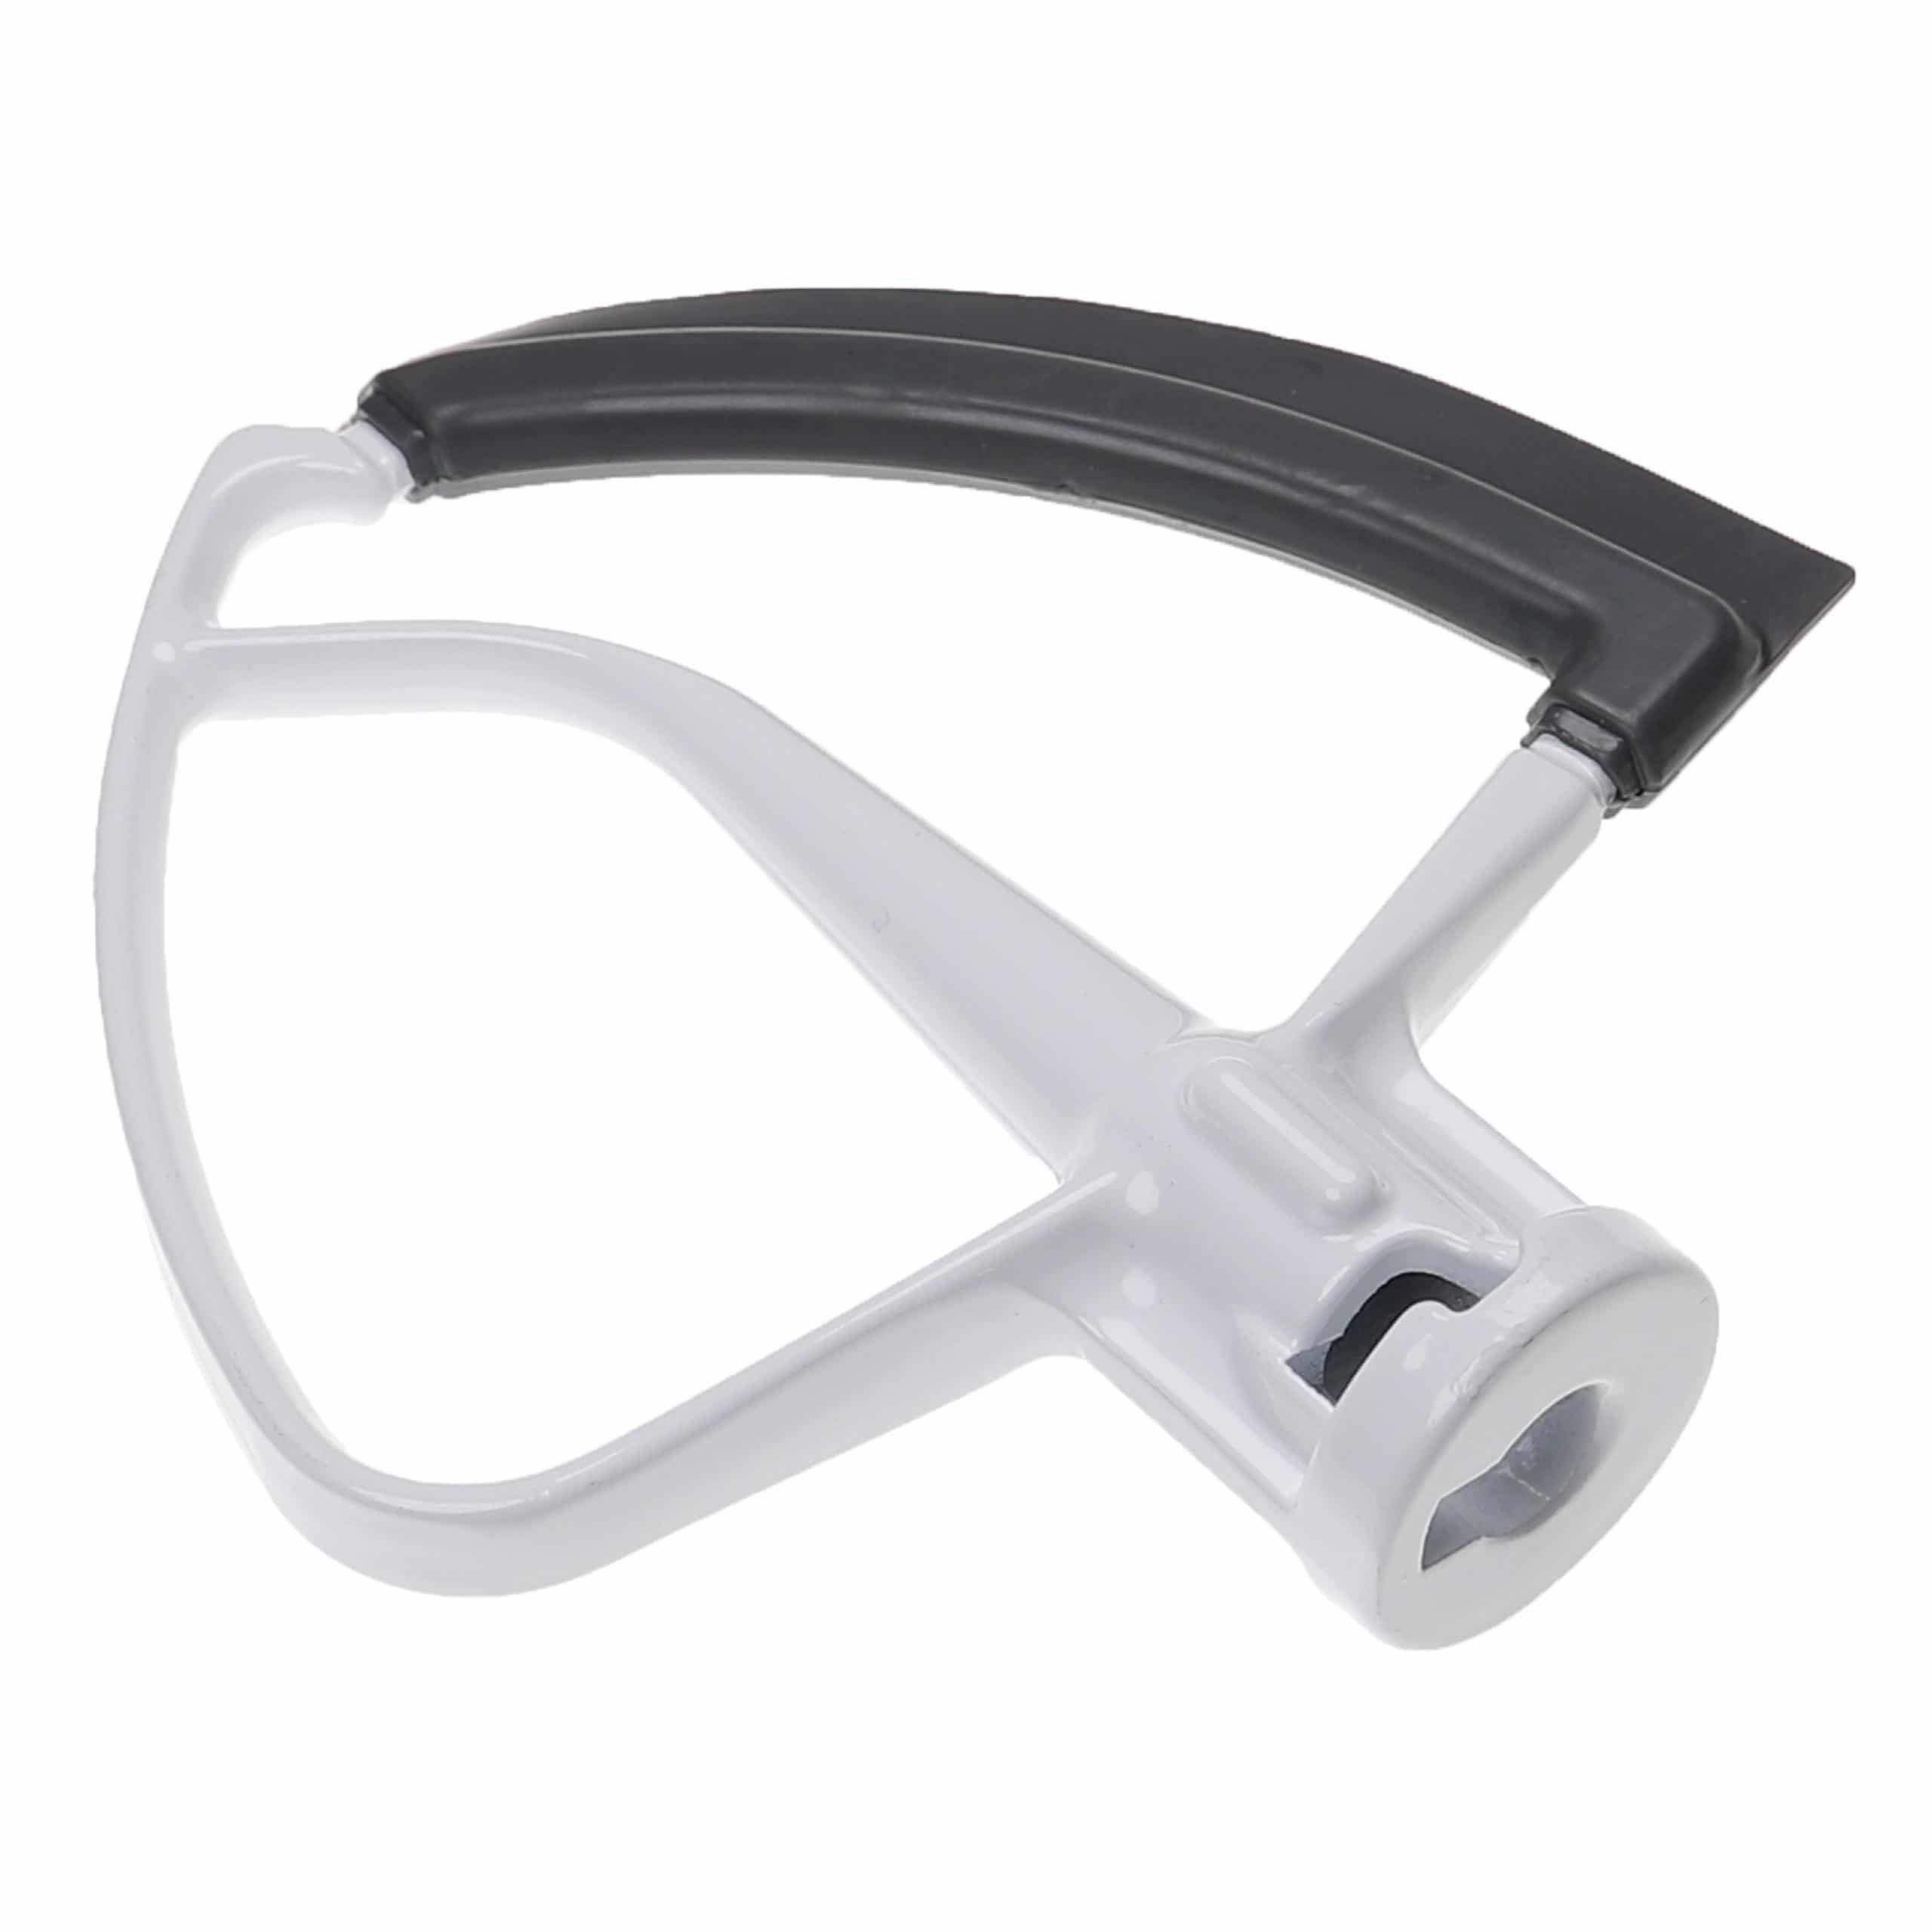 Flat Beater as Replacement for KitchenAid 5KFE5T Suitable for KitchenAid Kitchen Machine - Flexi Stirrer Whisk